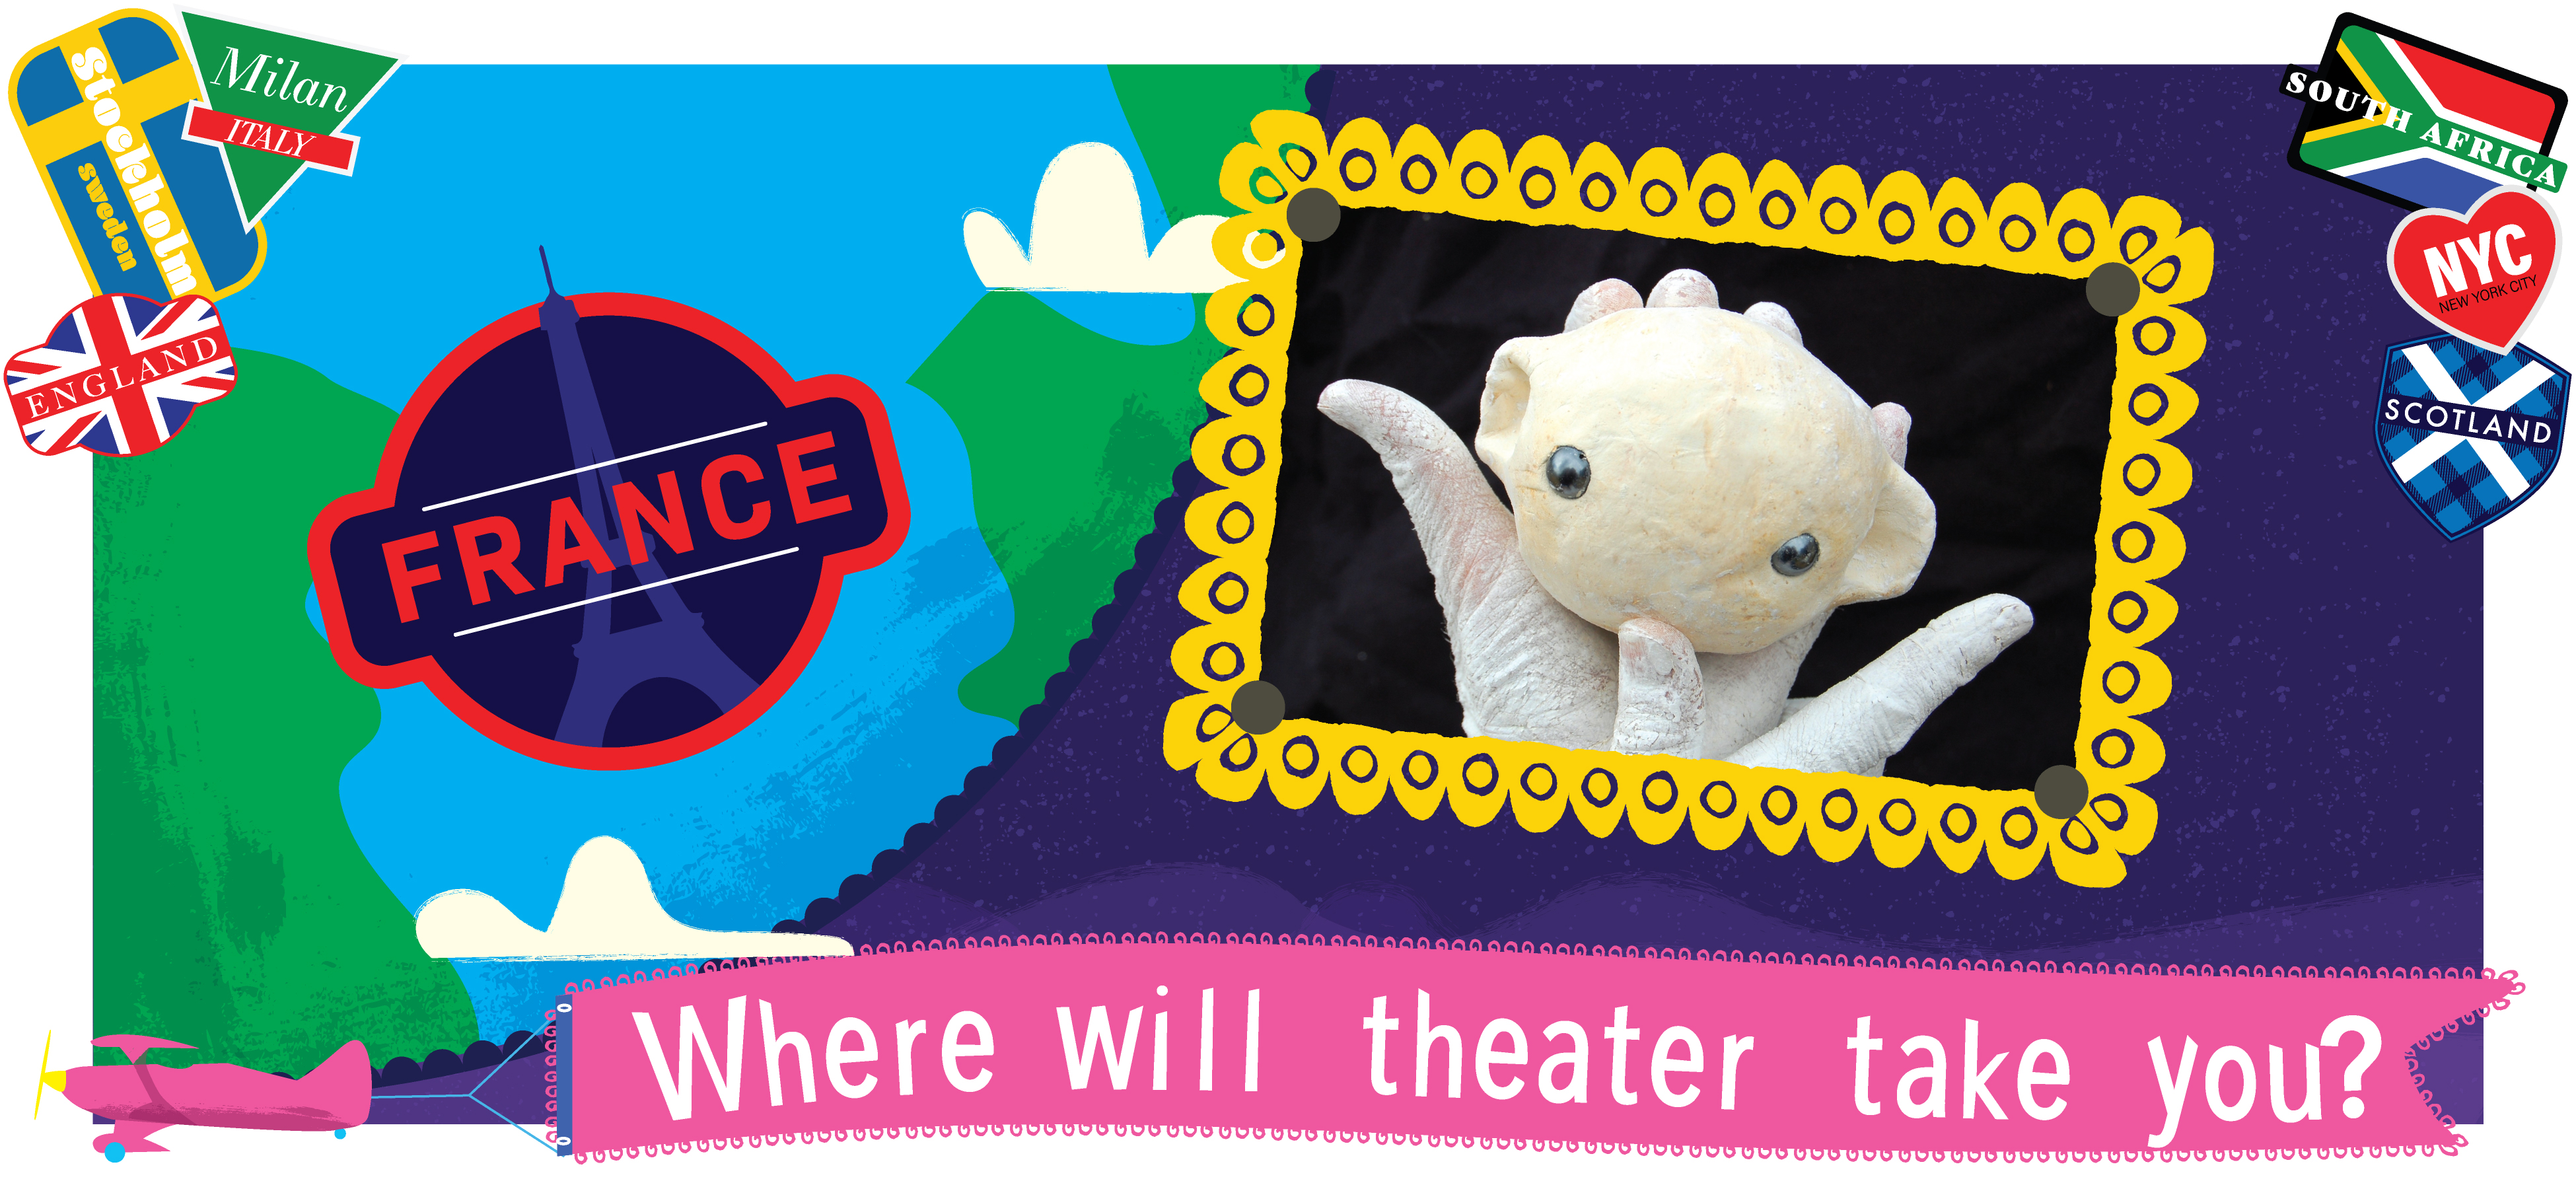 Where will theater take you?